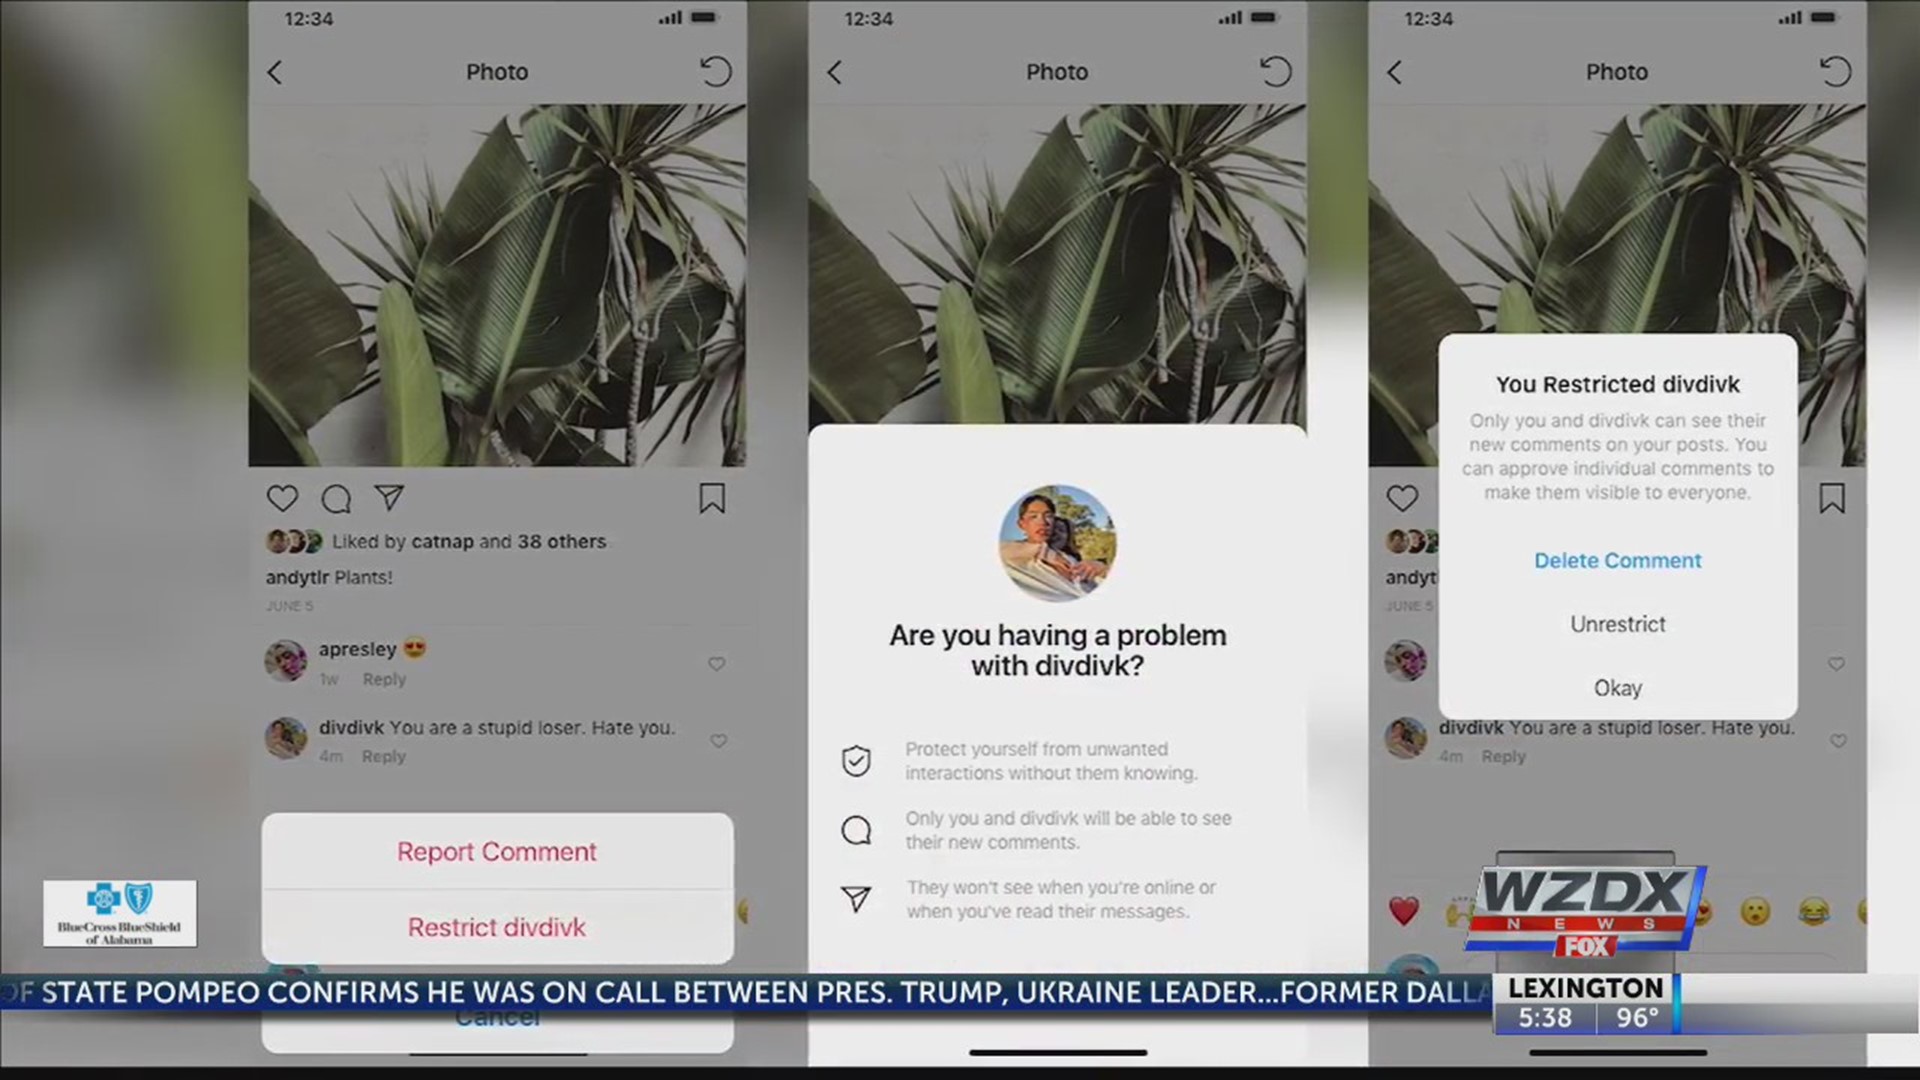 A new 'Restrict' feature on Instagram aims to protect users from cyberbullying.